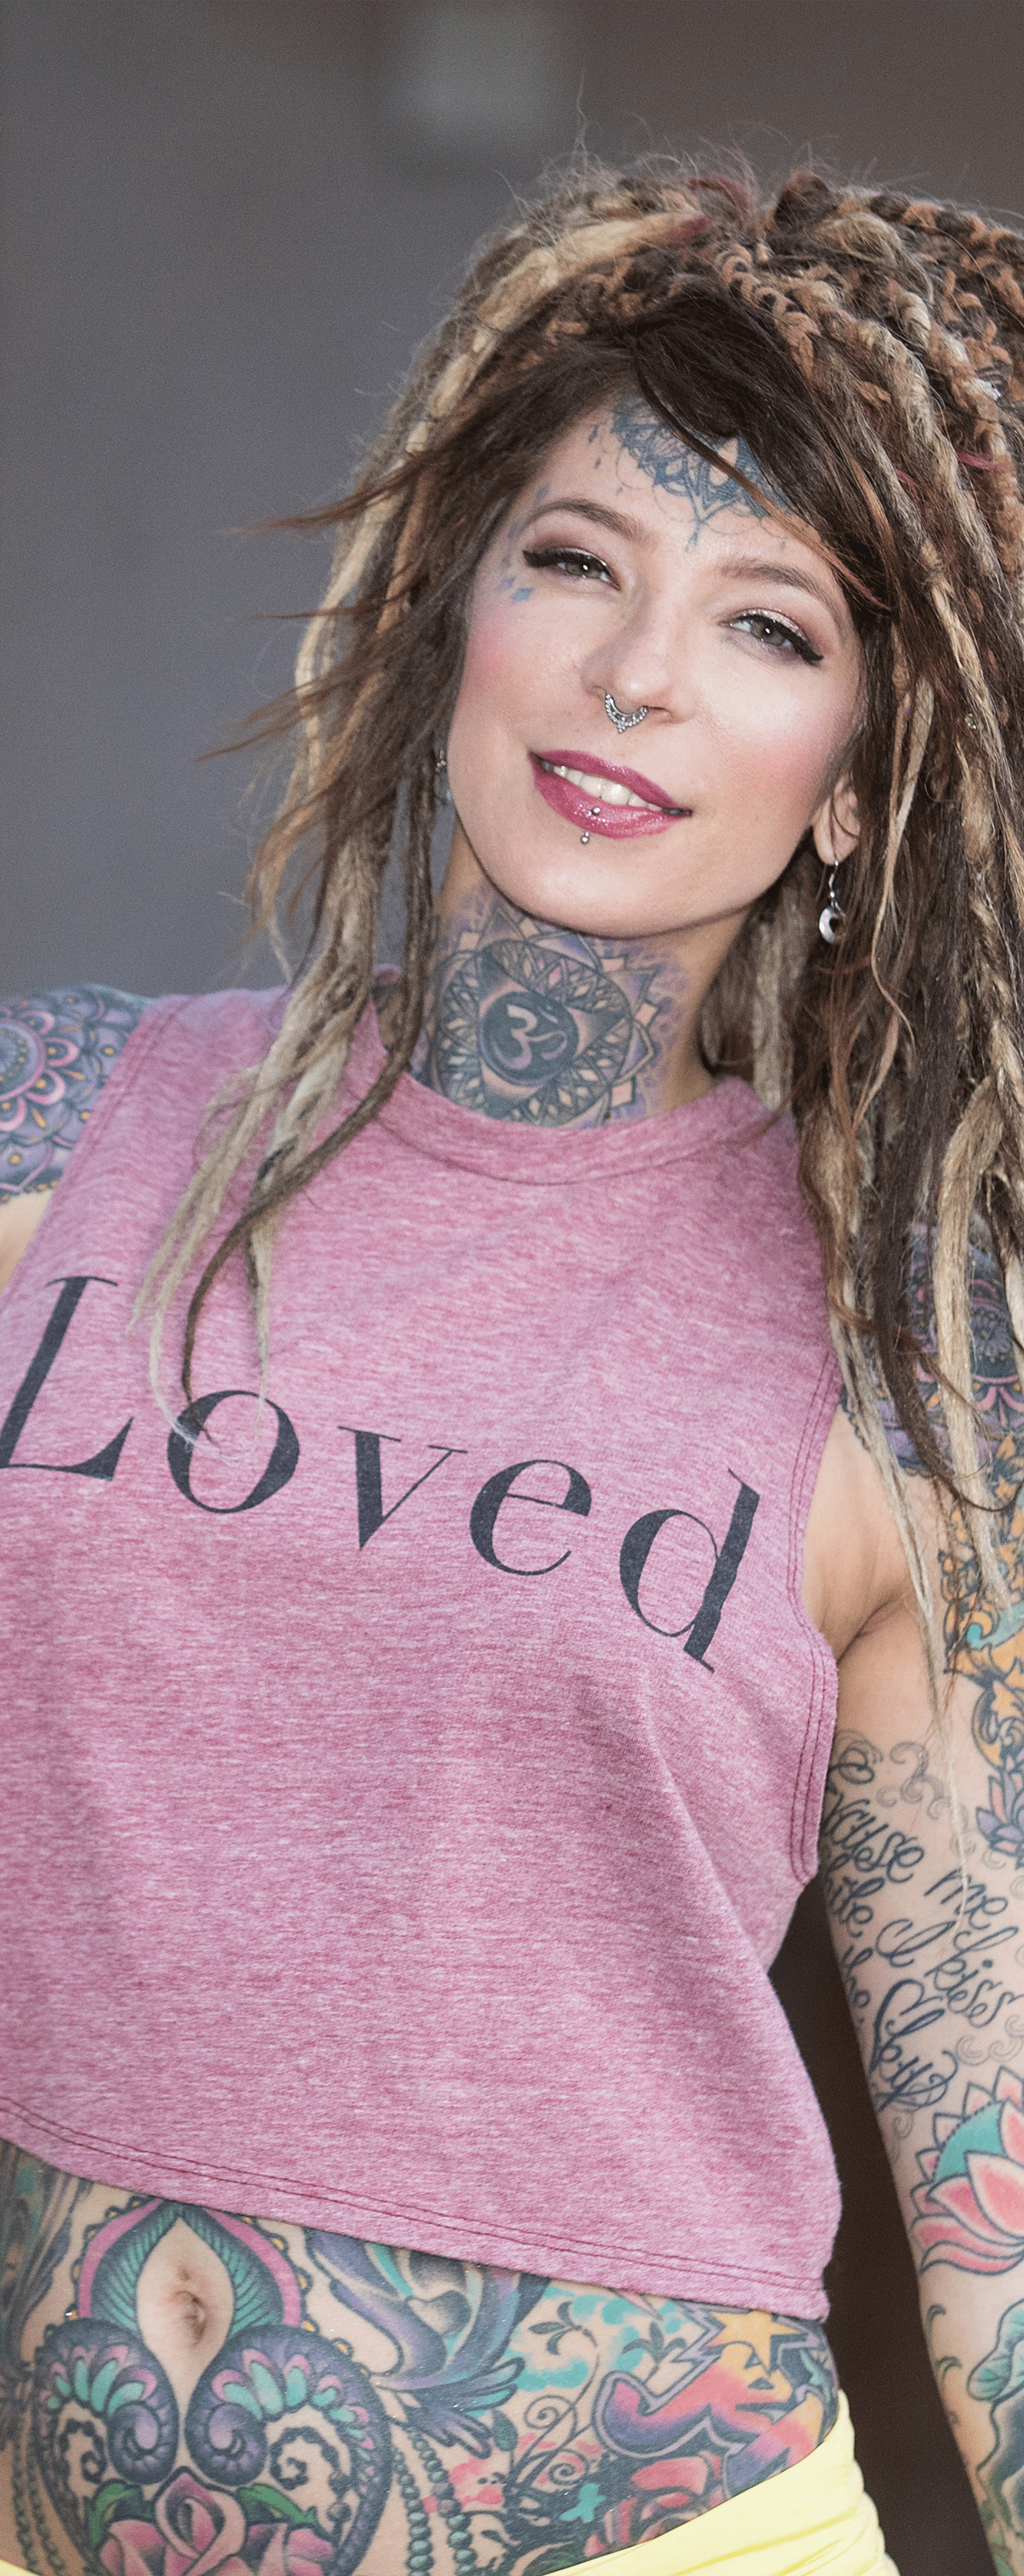 tattoo artist with loved shirt